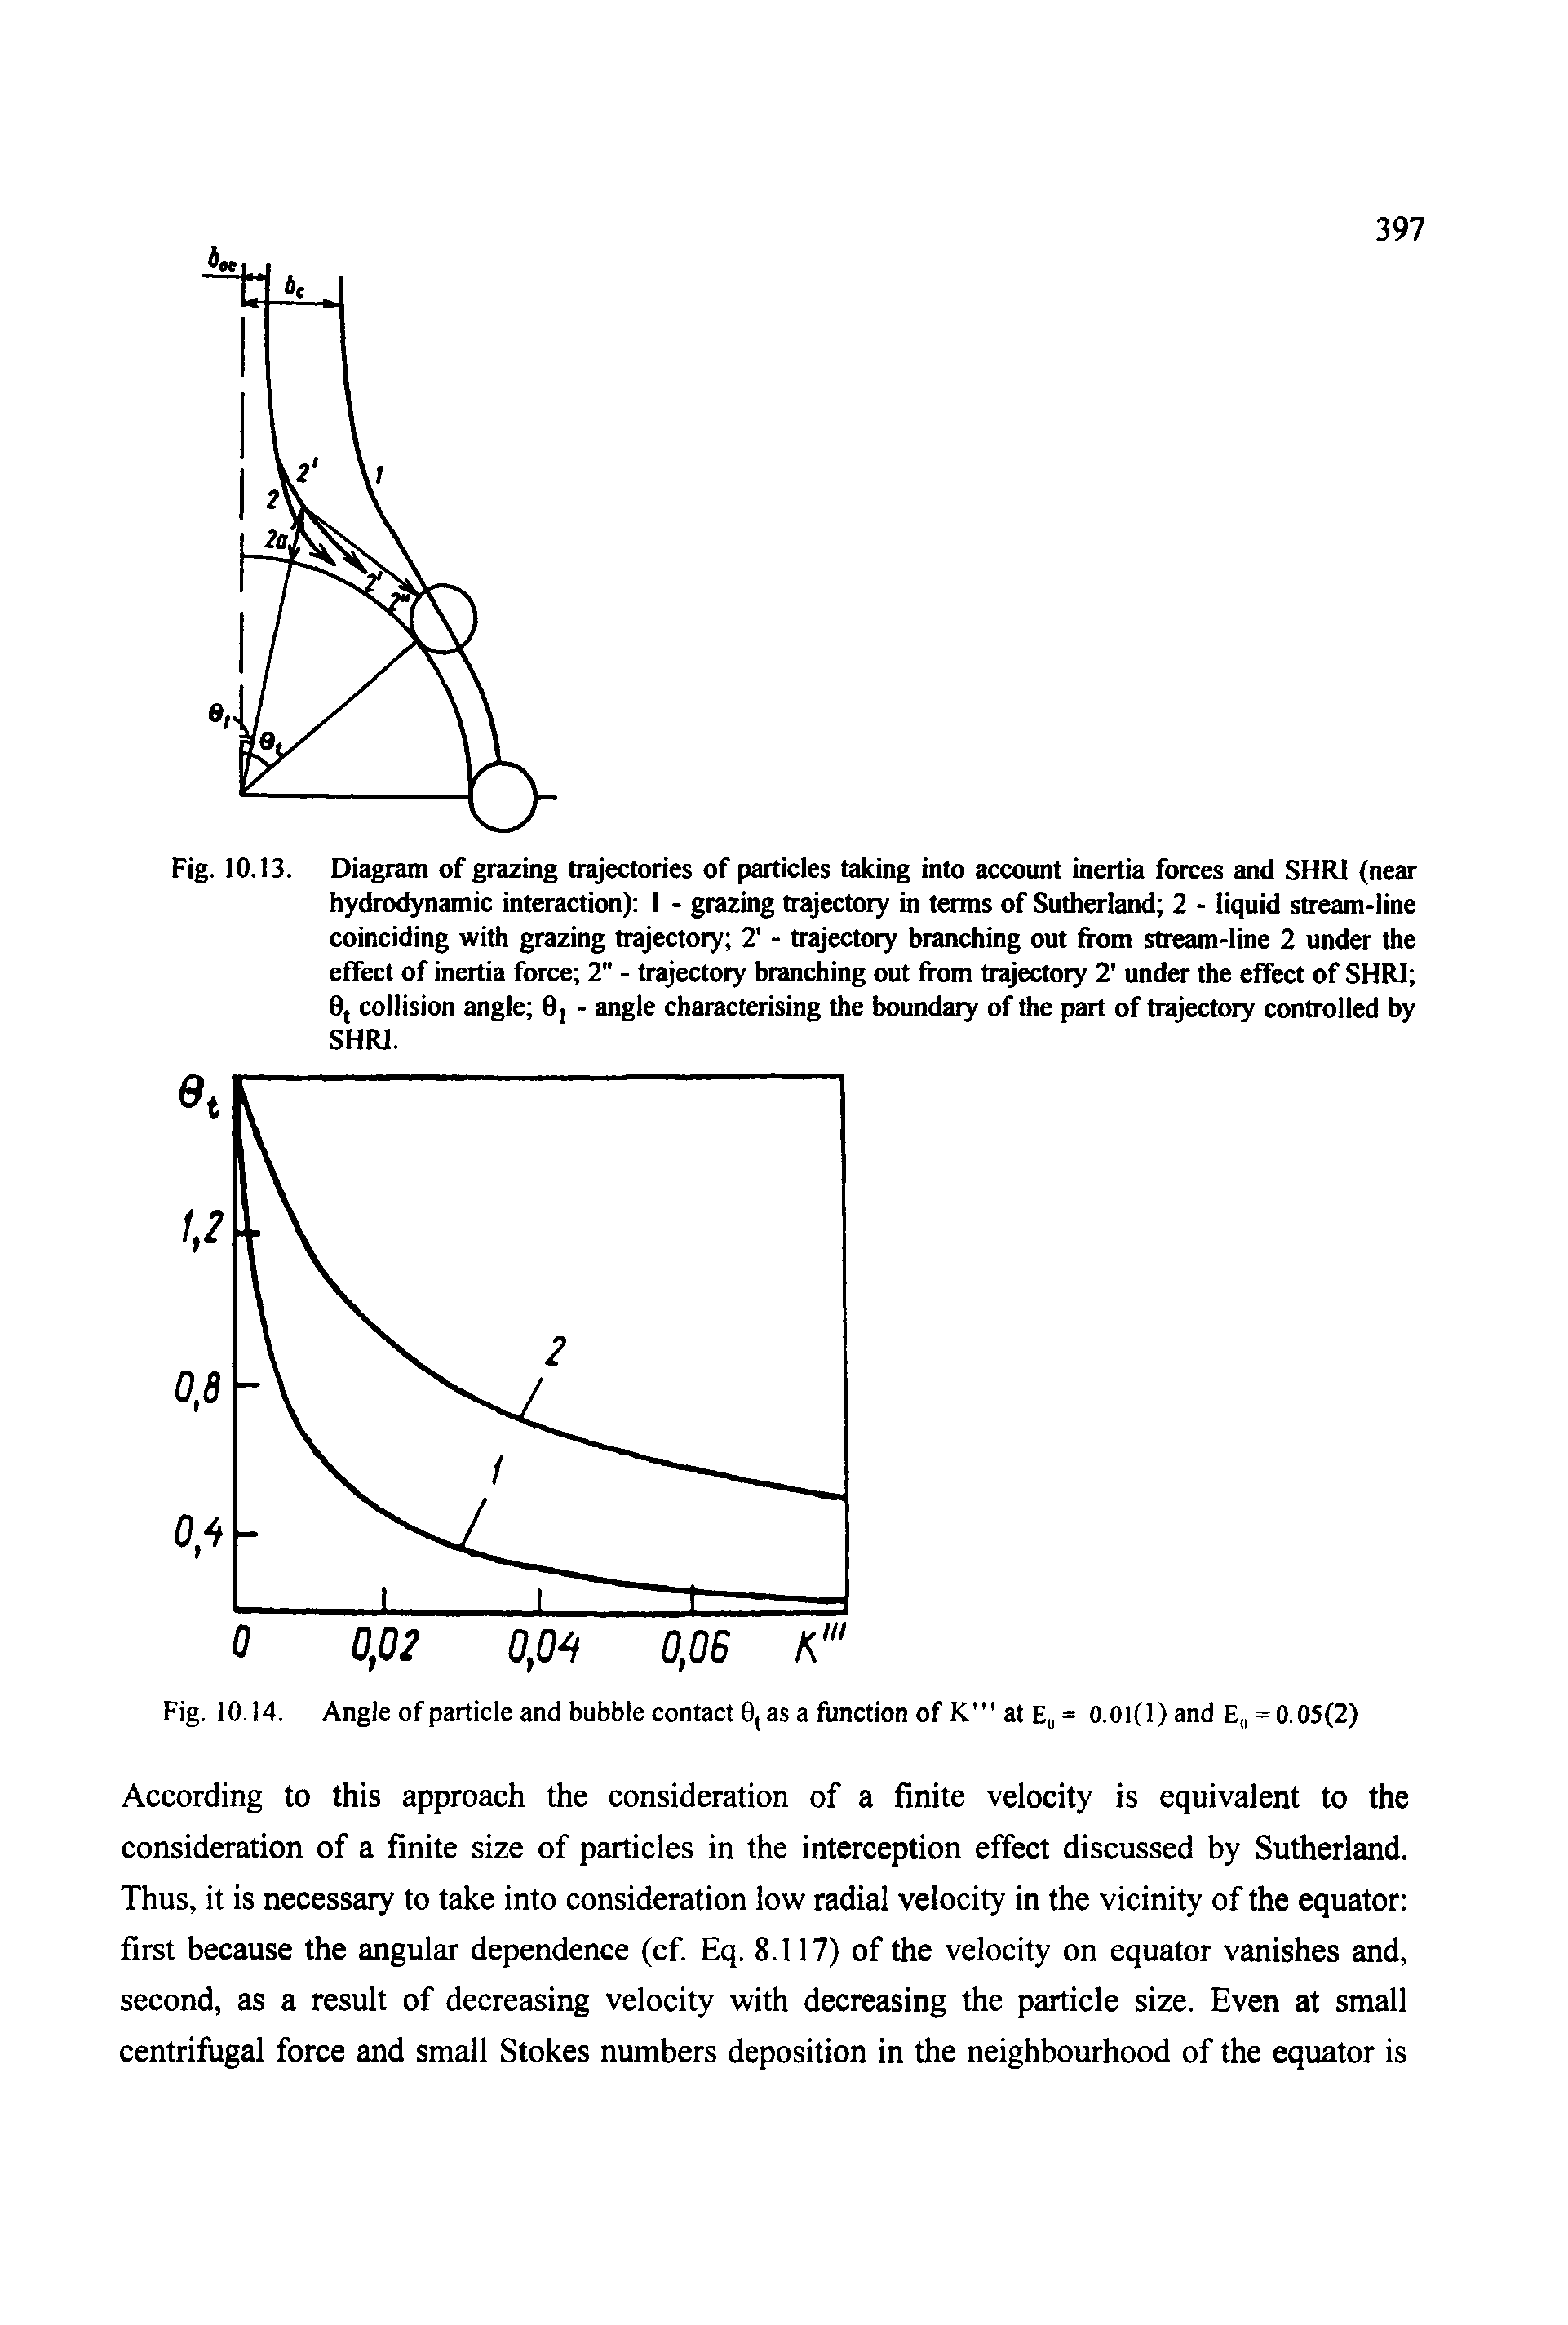 Fig. 10.13. Diagram of grazing trajectories of particles taking into account inertia forces and SHRI (near hydrodynamic interaction) 1 - grazing trajectory in terms of Sutherland 2 - liquid stream-line coinciding with grazing trajectory 2 - trajectory branching out from stream-line 2 under the effect of inertia force 2" - trajectory branching out from trajectory 2 under the effect of SHRI 0( collision angle 6 - angle characterising the boundary of the part of trajectory controlled by SHRI.